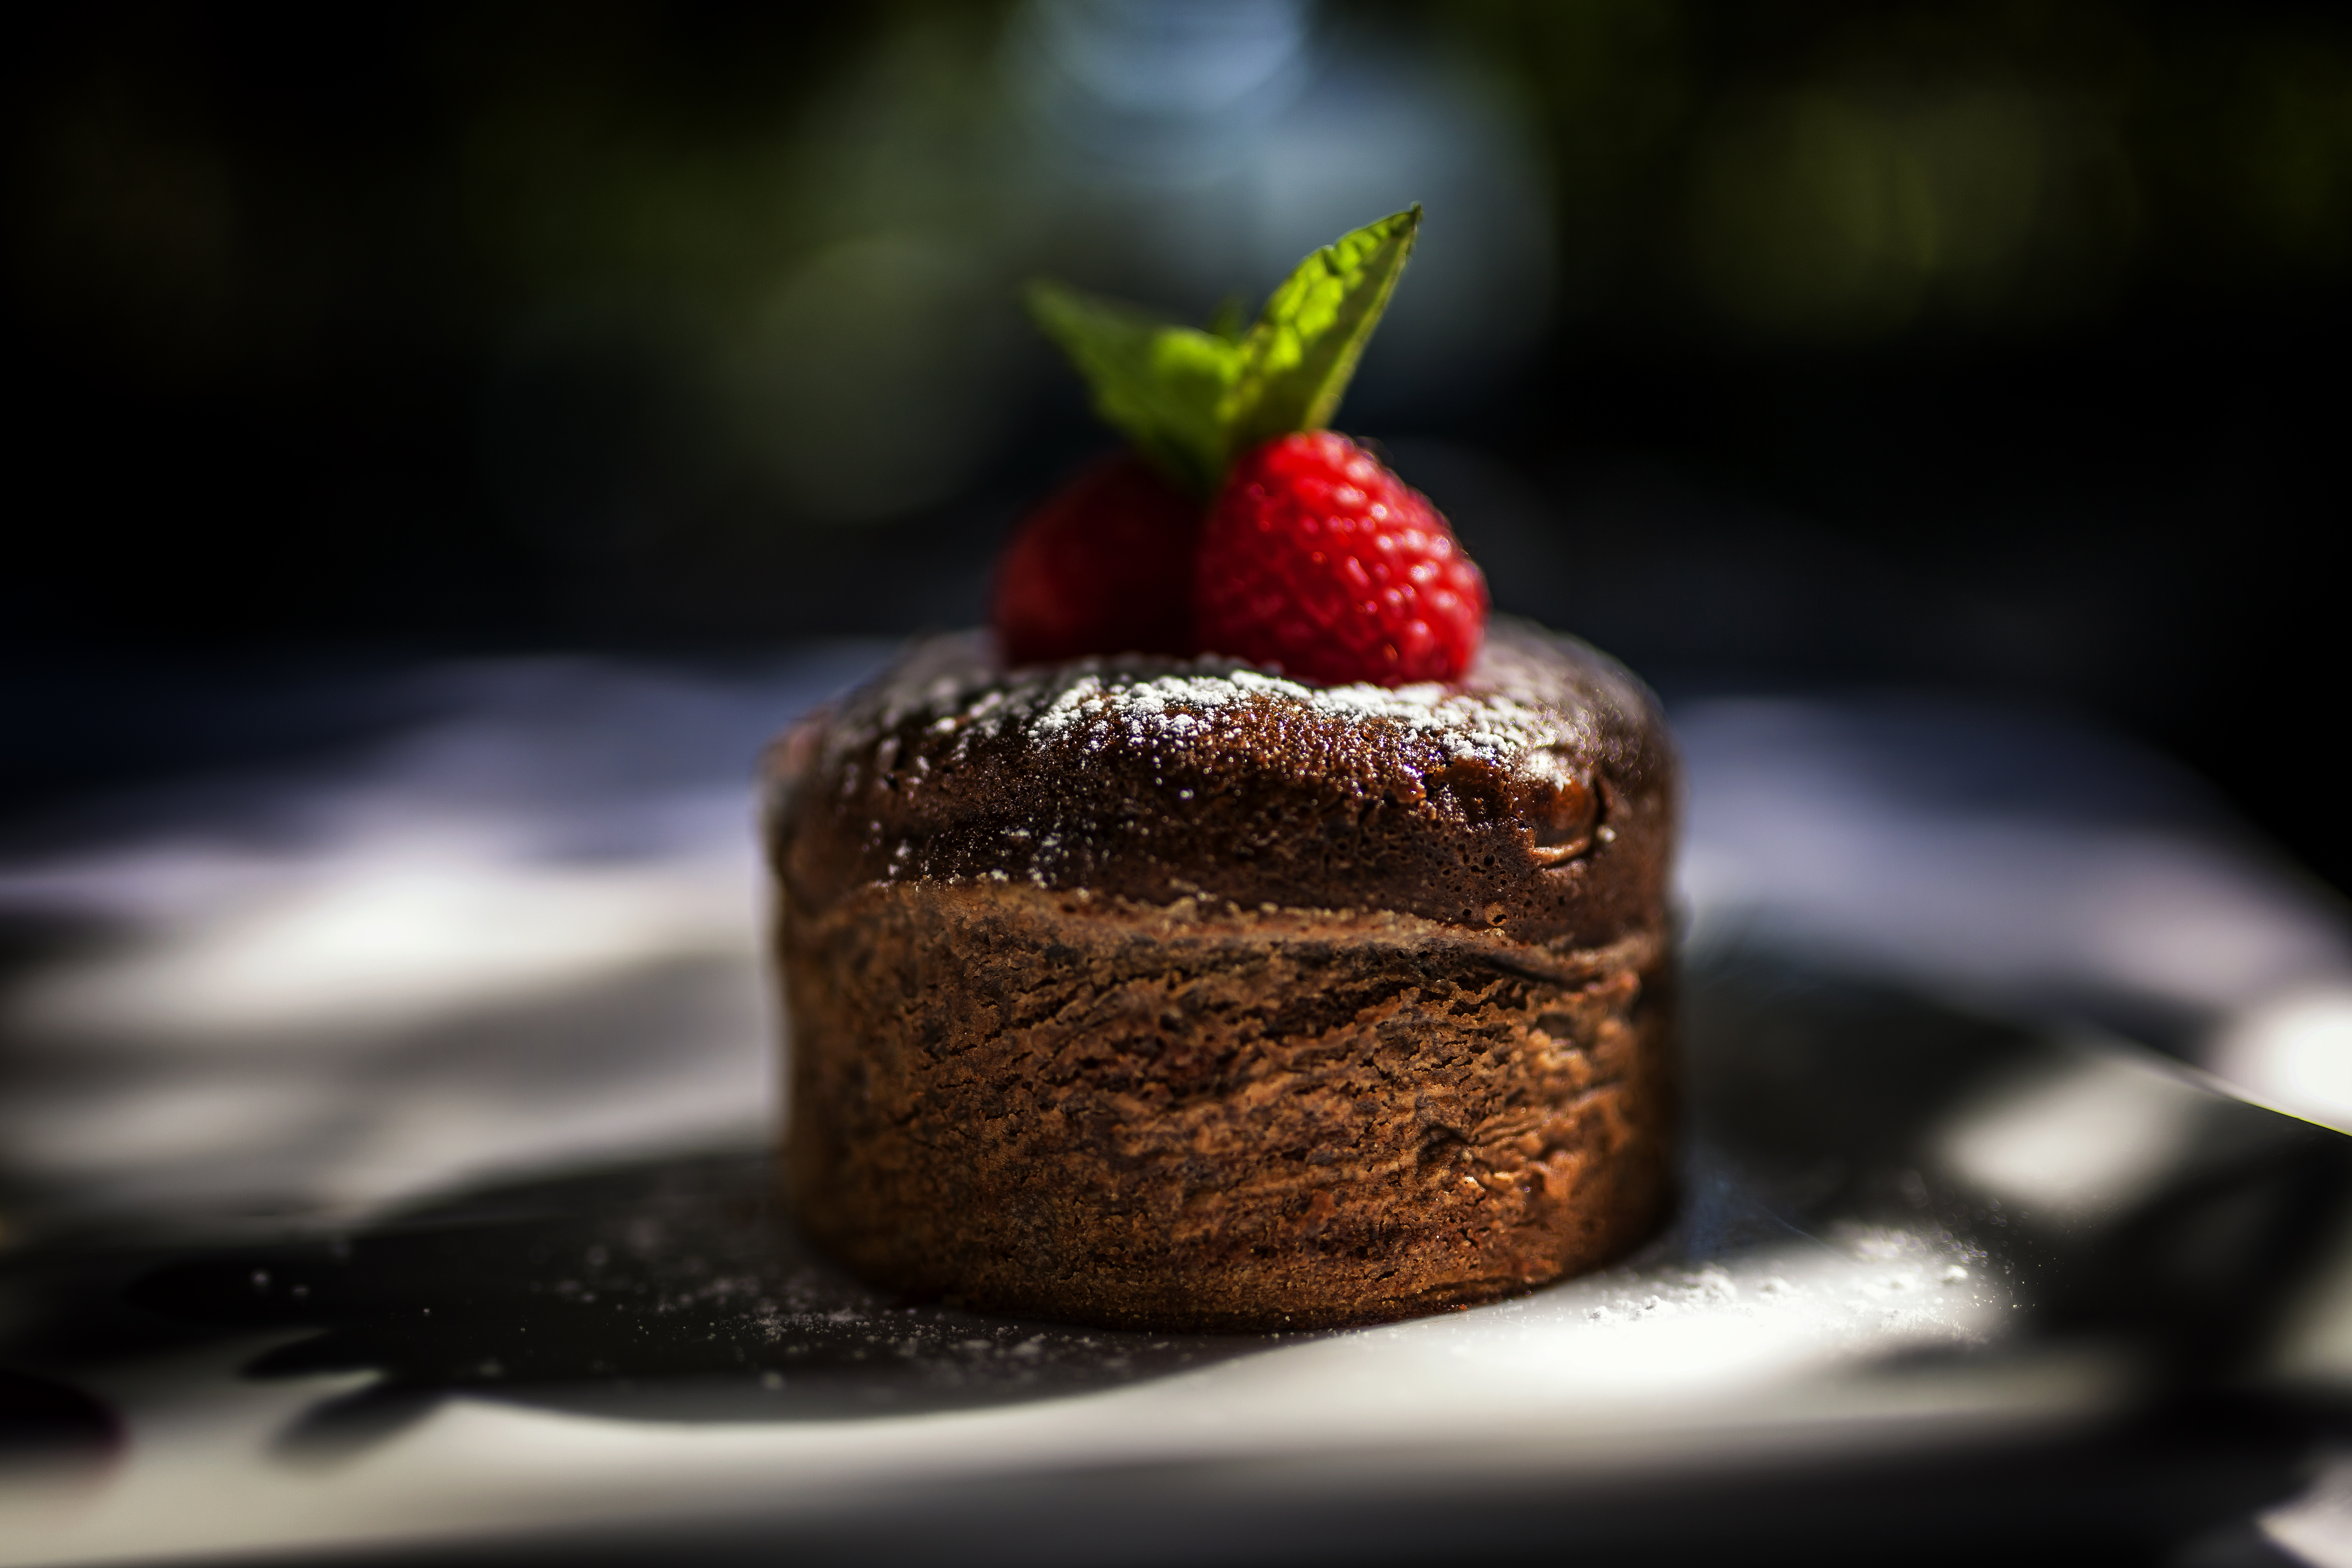 Chocolate cake dessert | Source: Getty Images